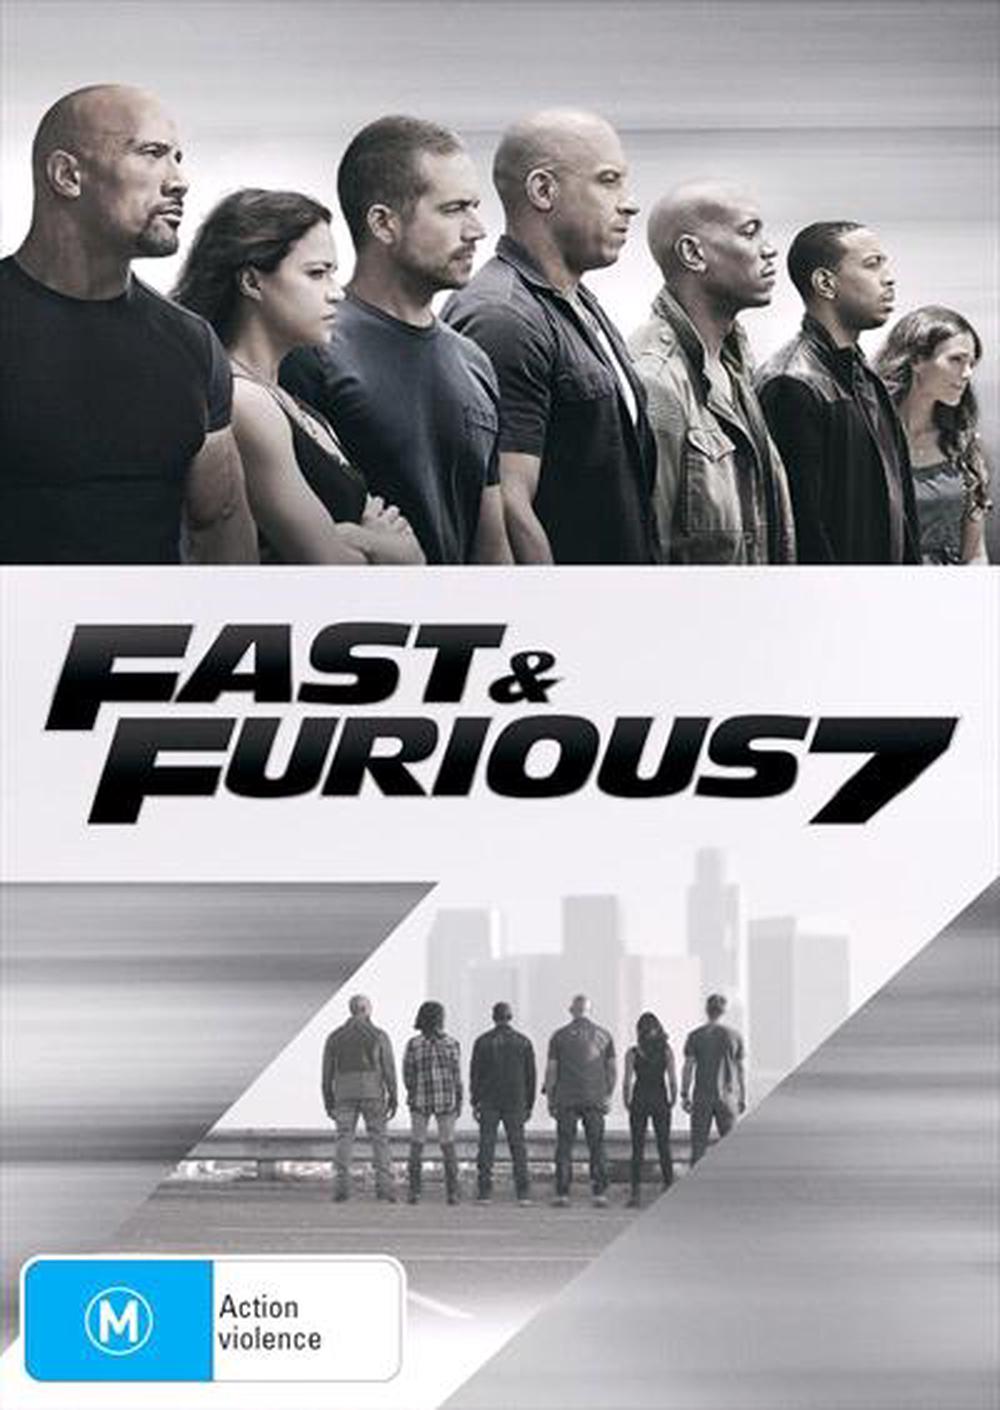 Fast & Furious 7, DVD | Buy online at The Nile